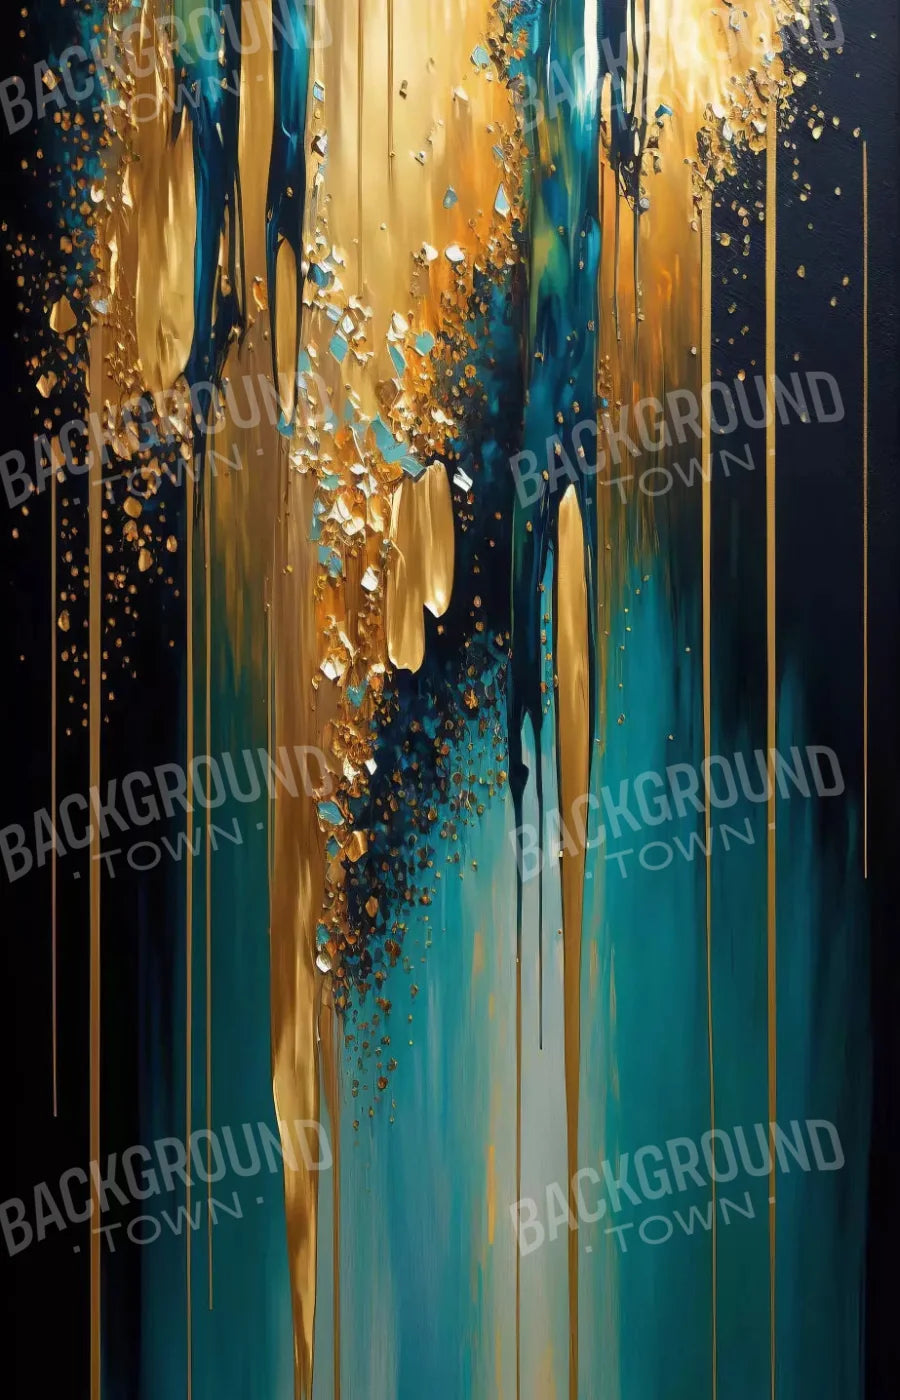 Abstract In Gold And Teal 8X12 Ultracloth ( 96 X 144 Inch ) Backdrop